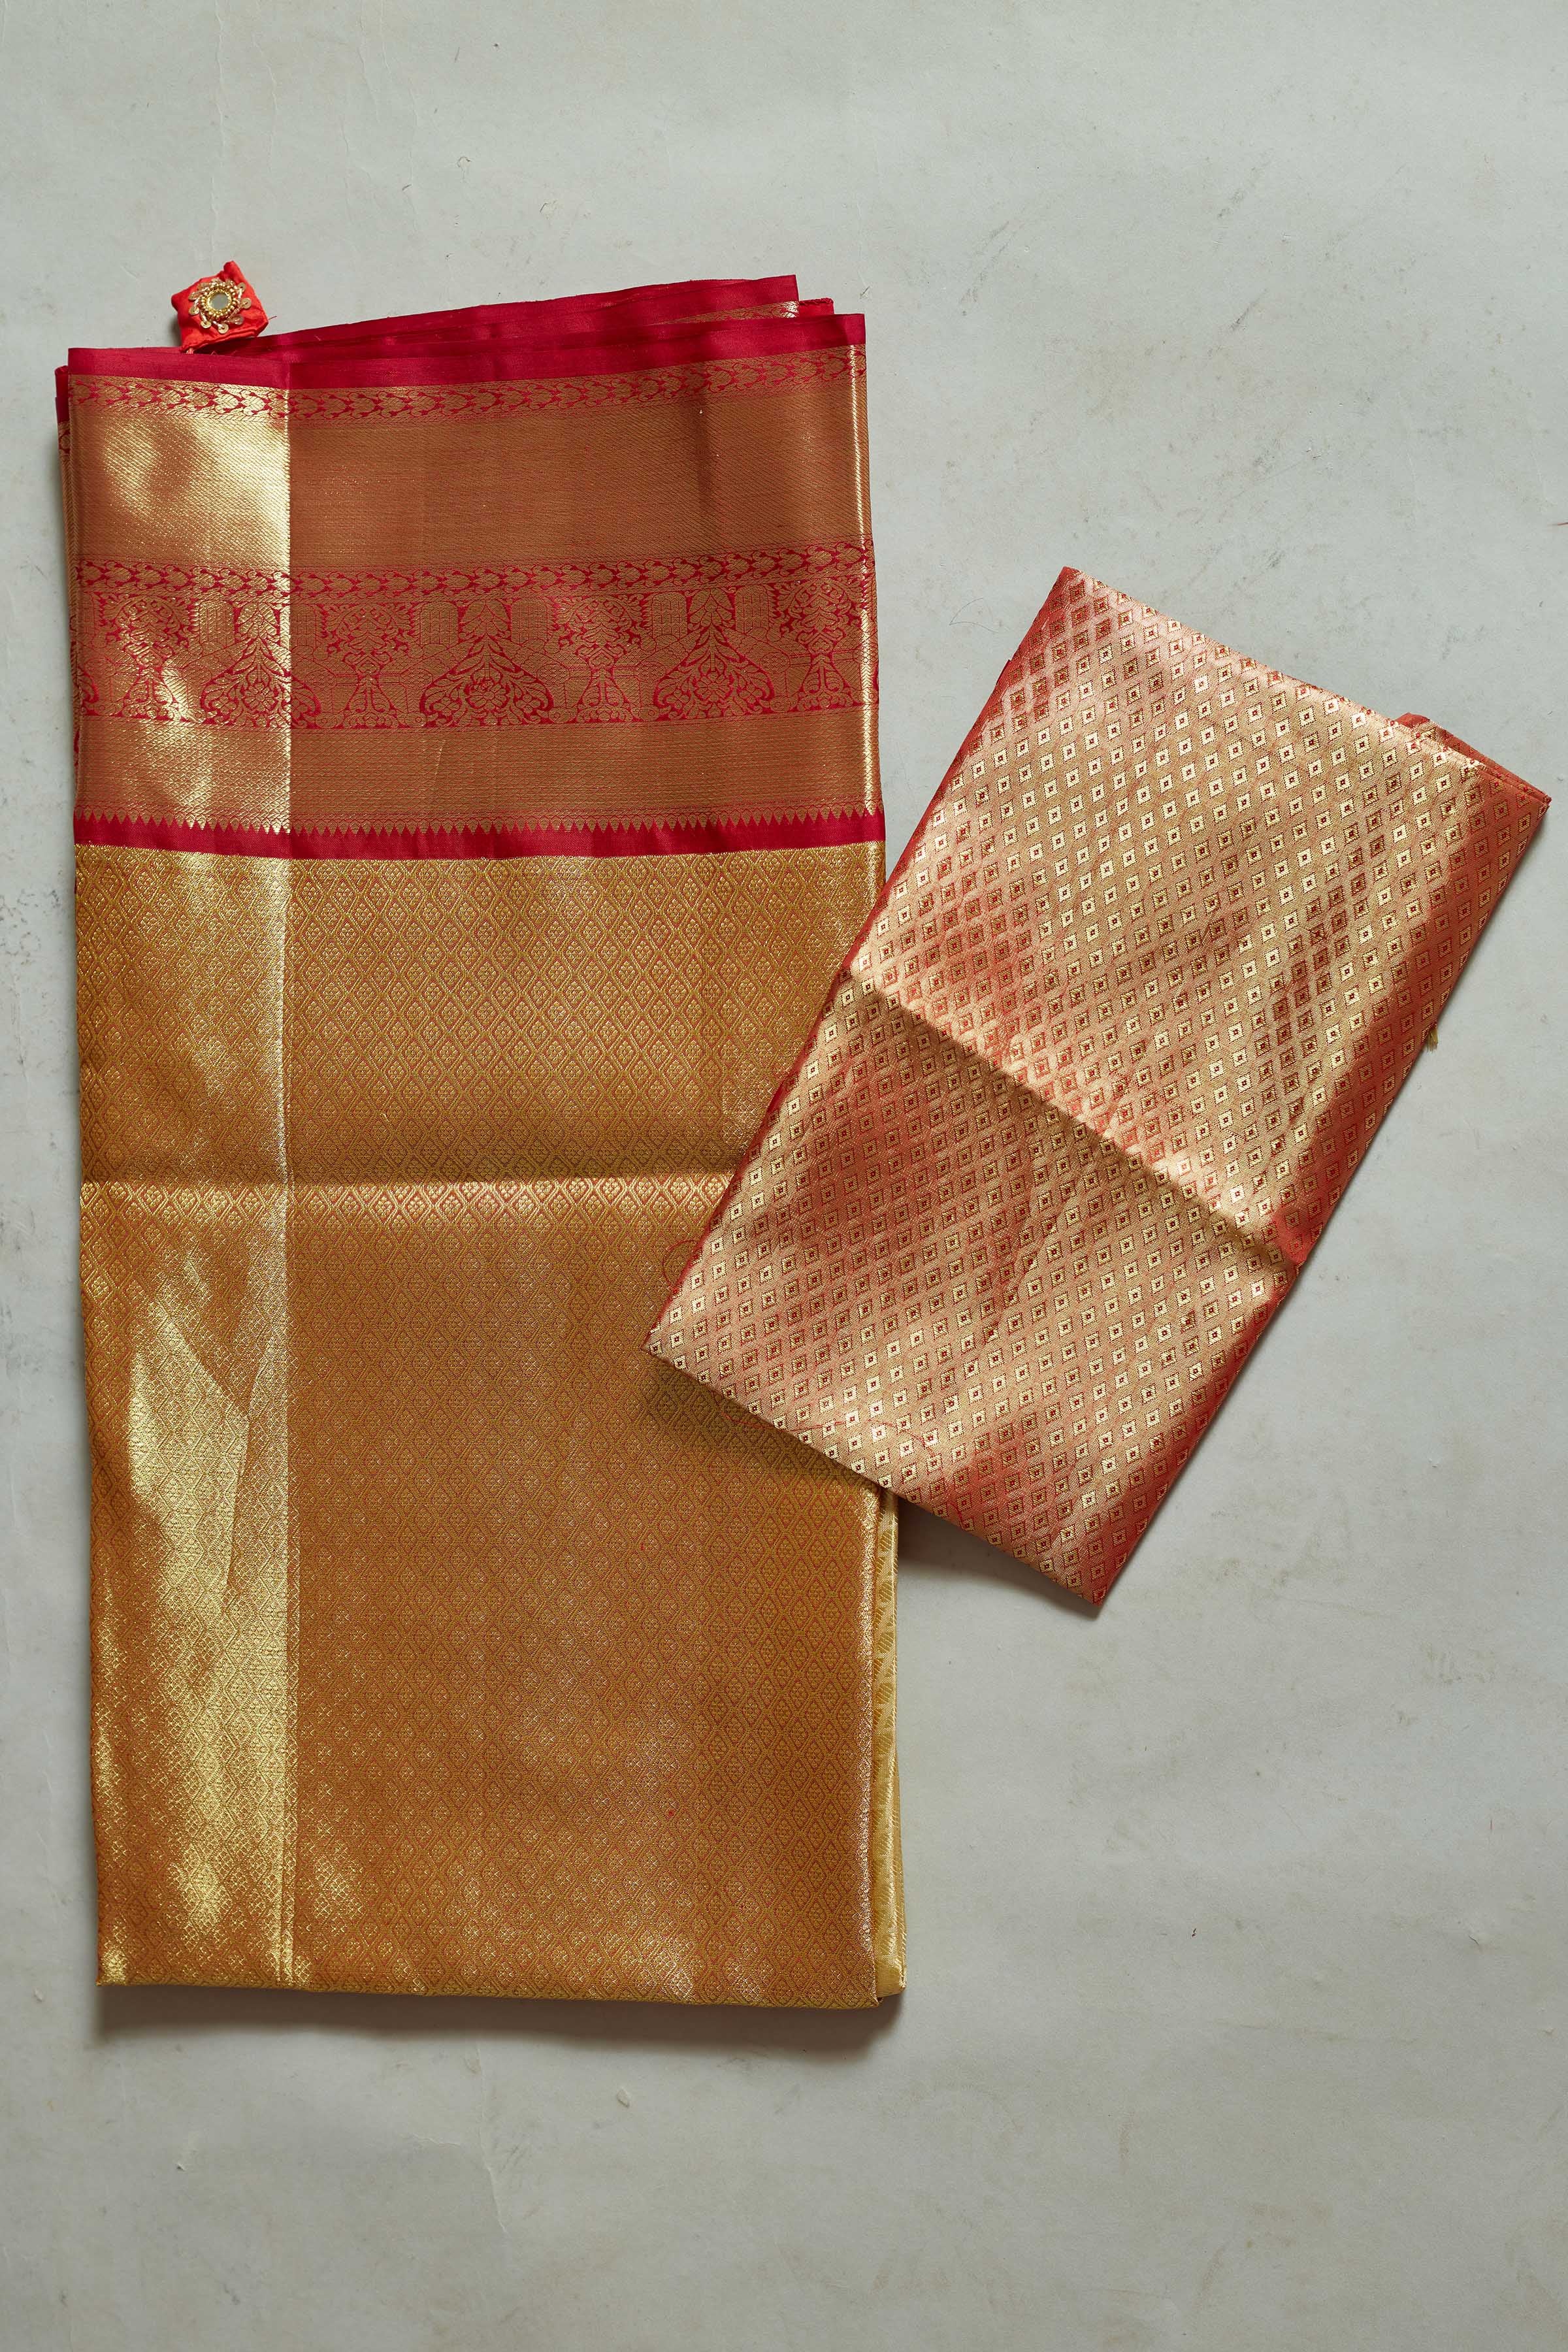 Buy cream Kanjivaram silk sari online in USA with red zari border. Look your best on festive occasions in latest designer sarees, pure silk sarees, Kanjivaram silk saris, handwoven saris, tussar silk sarees, embroidered saris from Pure Elegance Indian clothing store in USA.-blouse